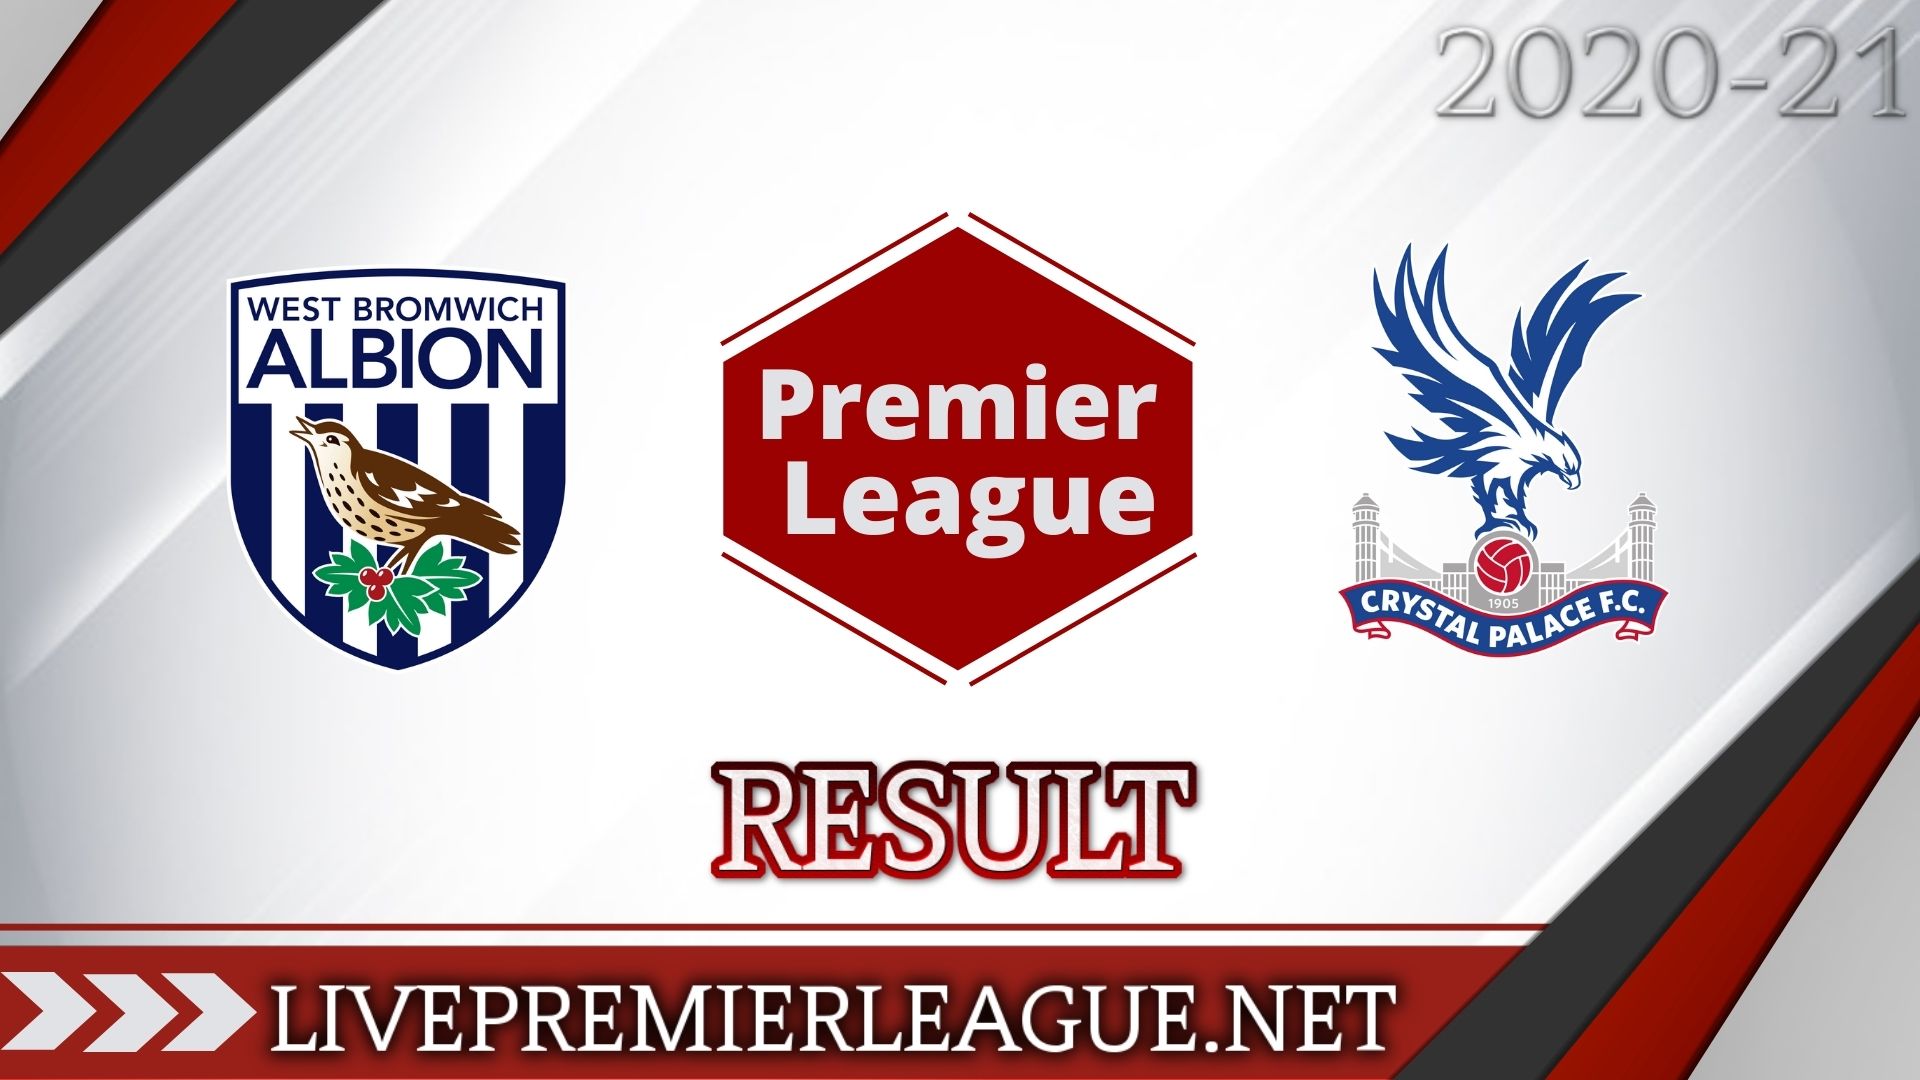 West Bromwich Albion Vs Crystal Palace | Week 11 Result 2020